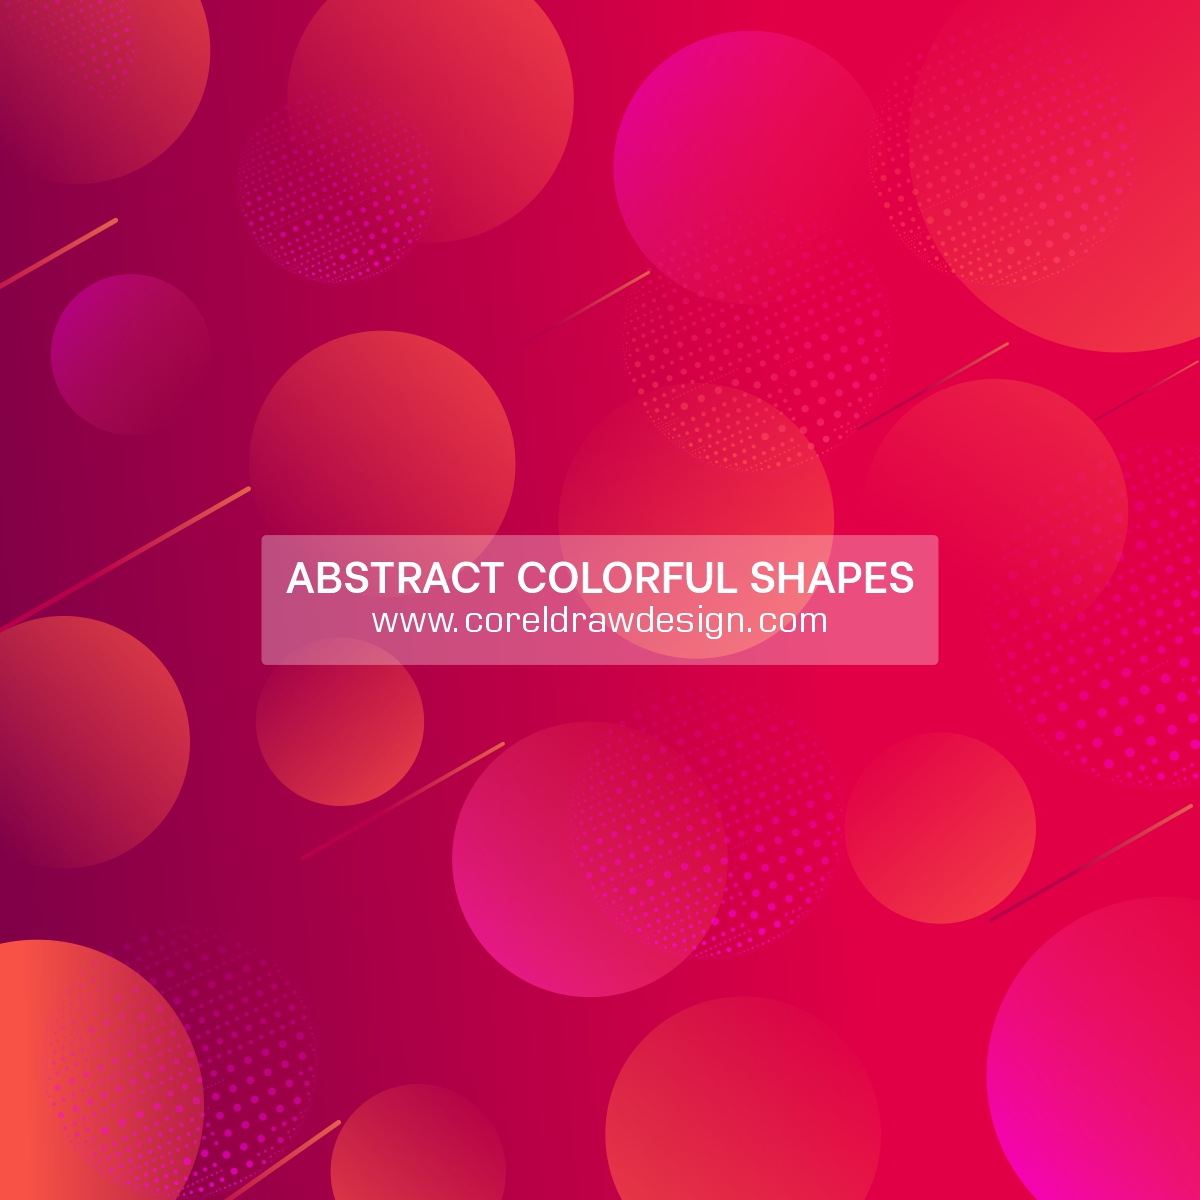 Abstract Colorful Shapes Background Free Vector